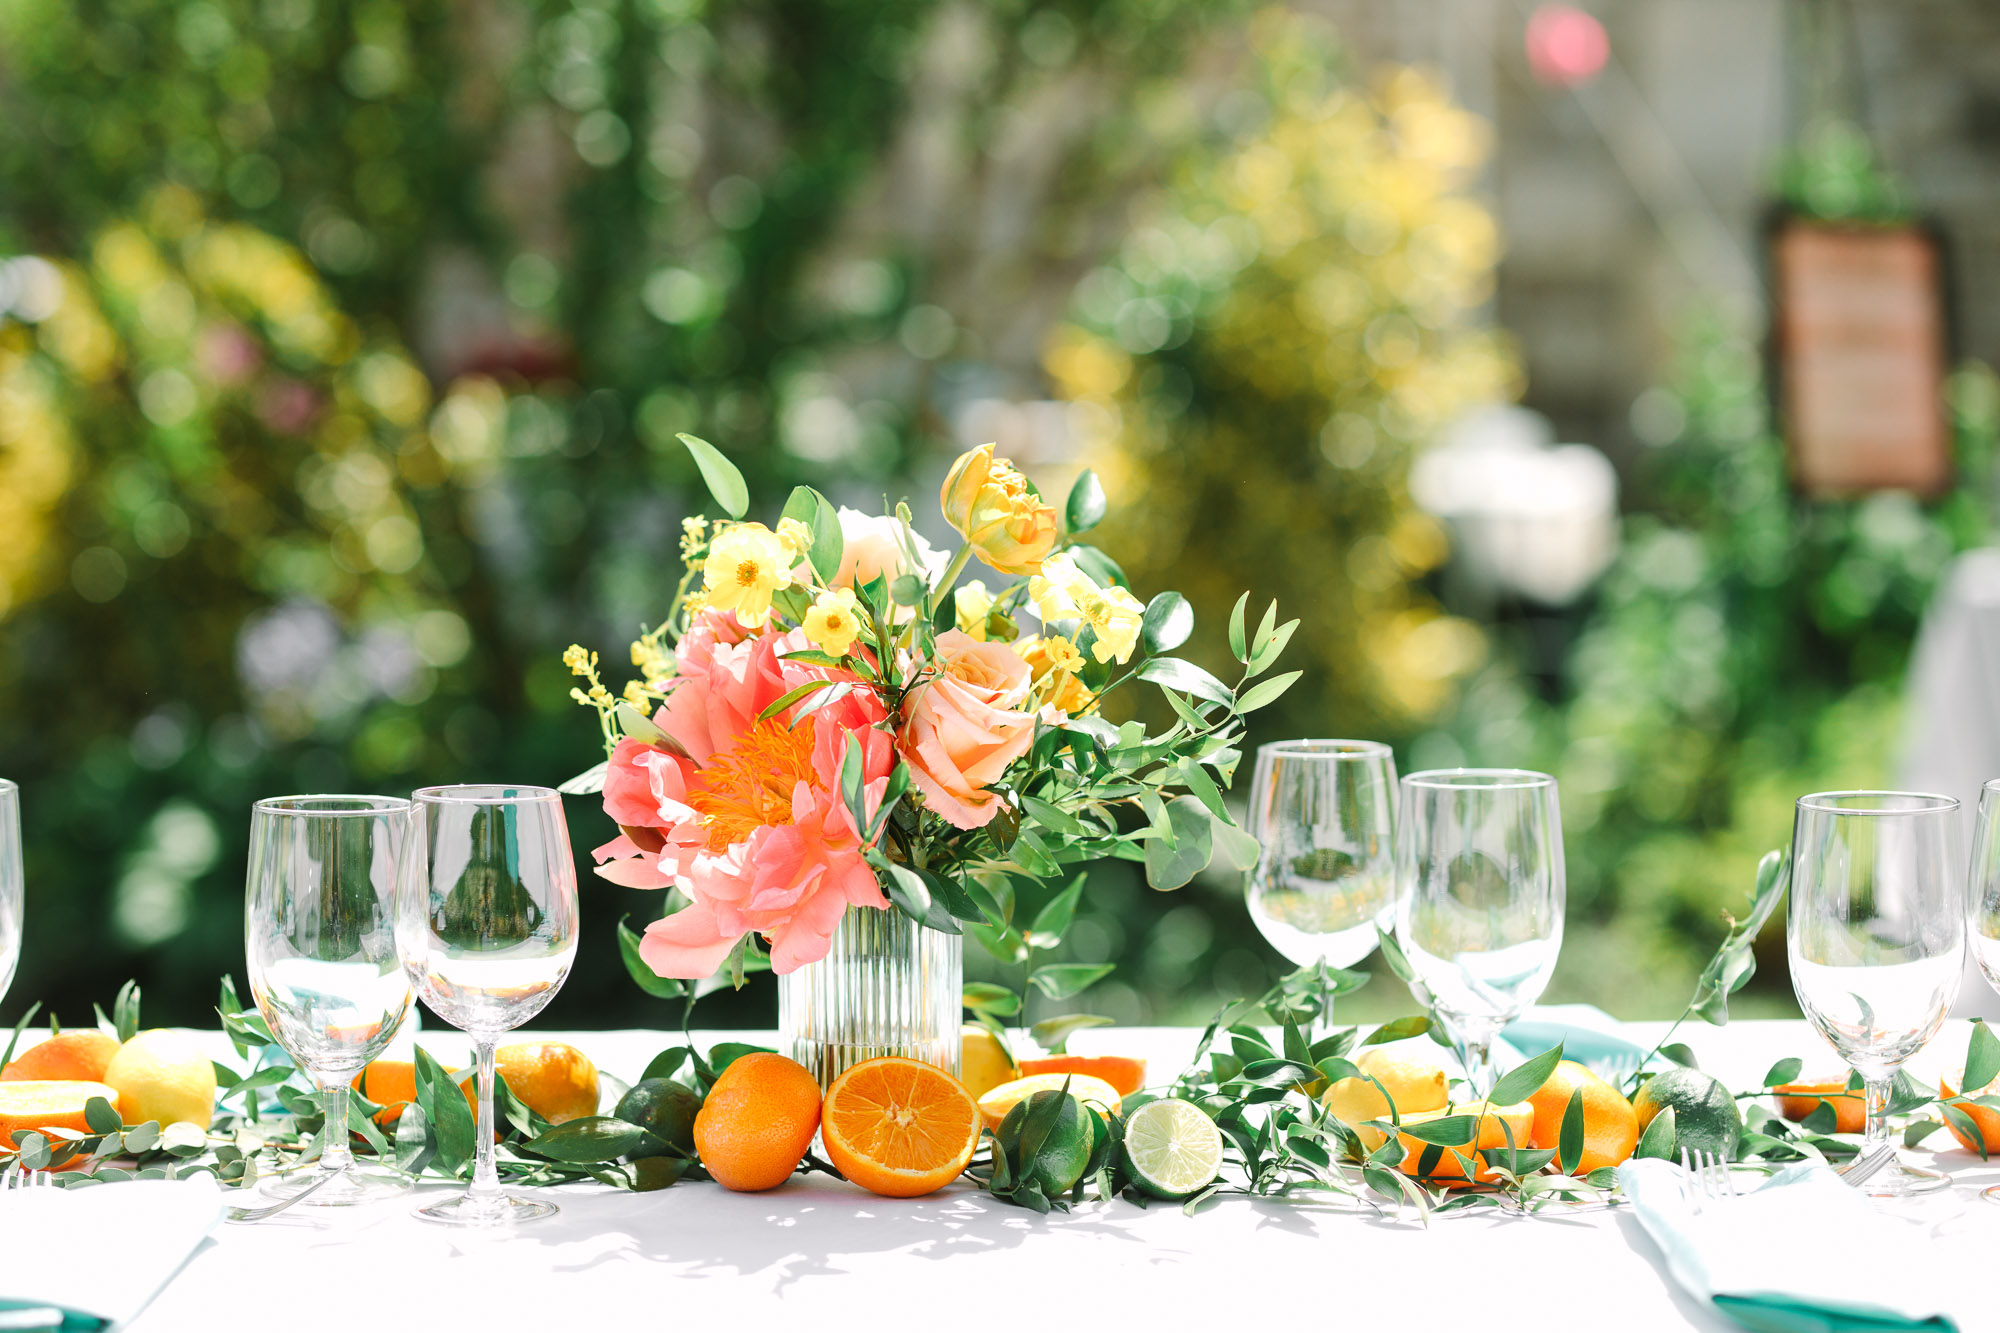 Citrus and flowers at luncheon wedding